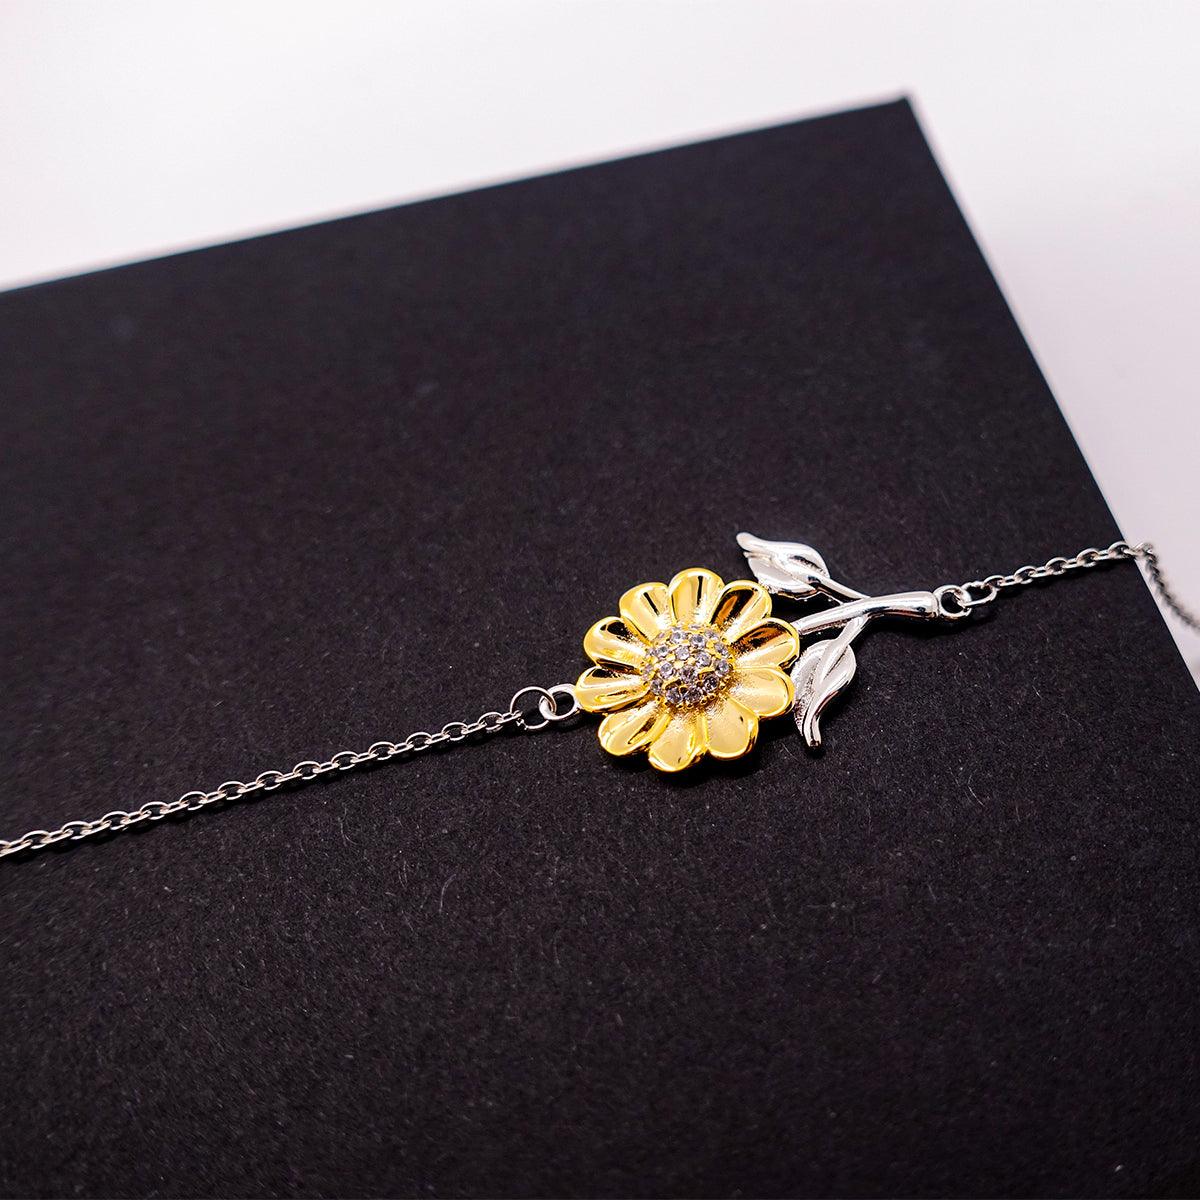 To My Wife I Want to Be Your Last Everything Sunflower Bracelet Romantic Valentine Gift - Mallard Moon Gift Shop